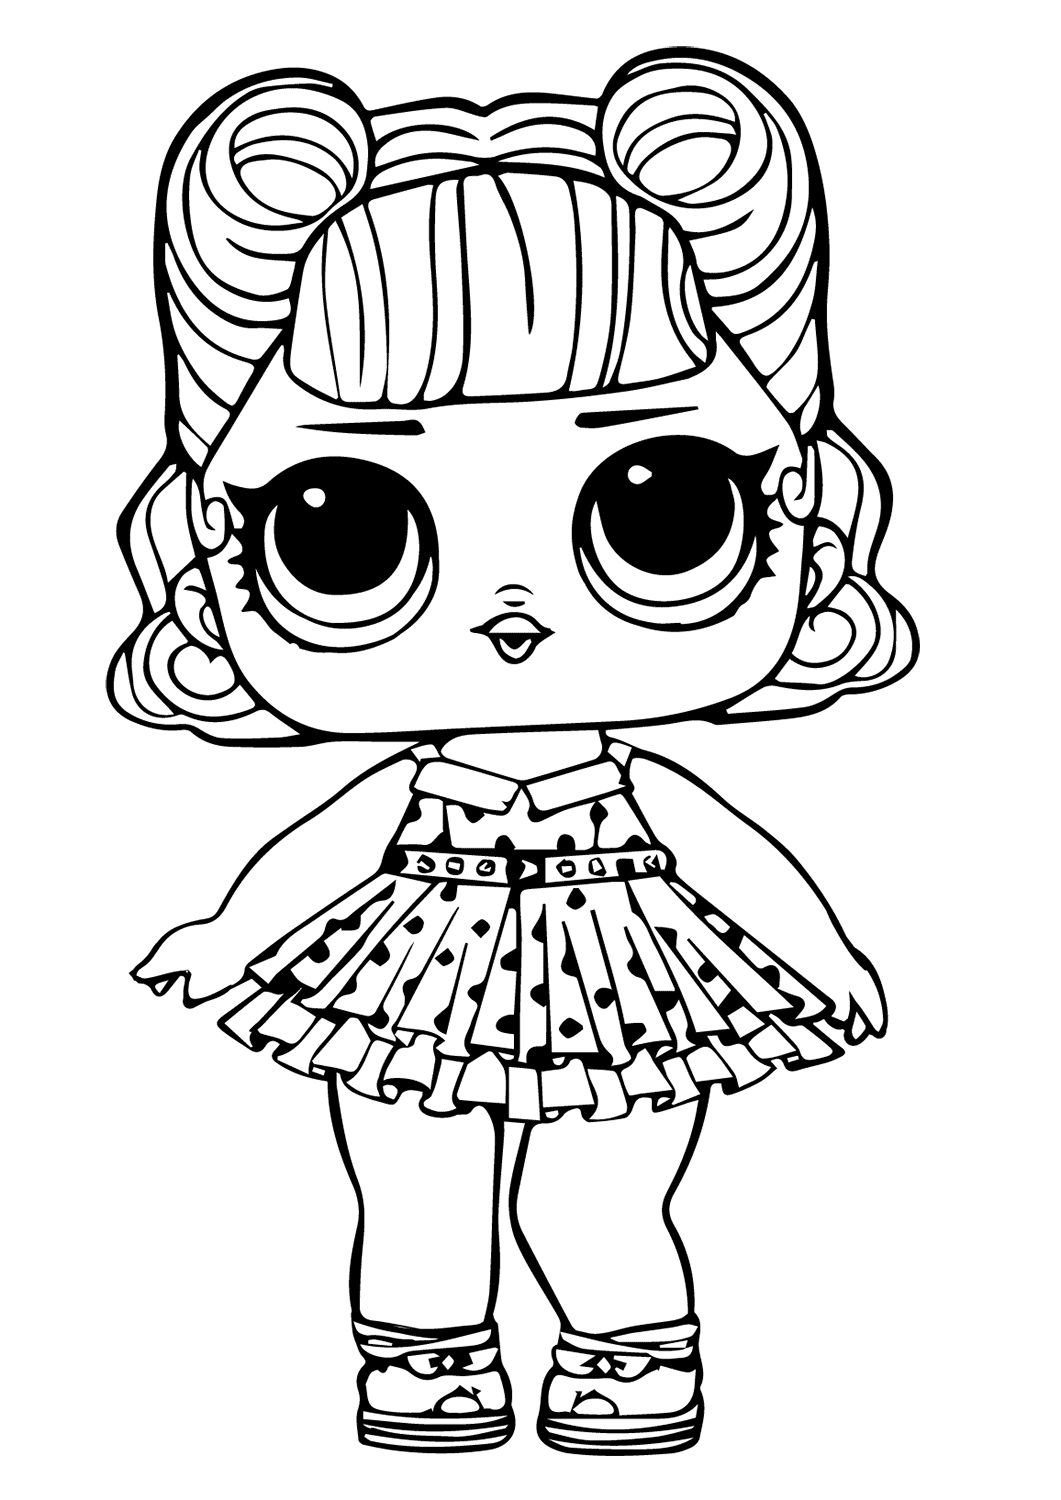 lol-surprise-doll-coloring-pages-free-8c019a68caecd456d7f7fb5b7ef57afa-kJWDdH Lol Surprise Doll Coloring Pages Free